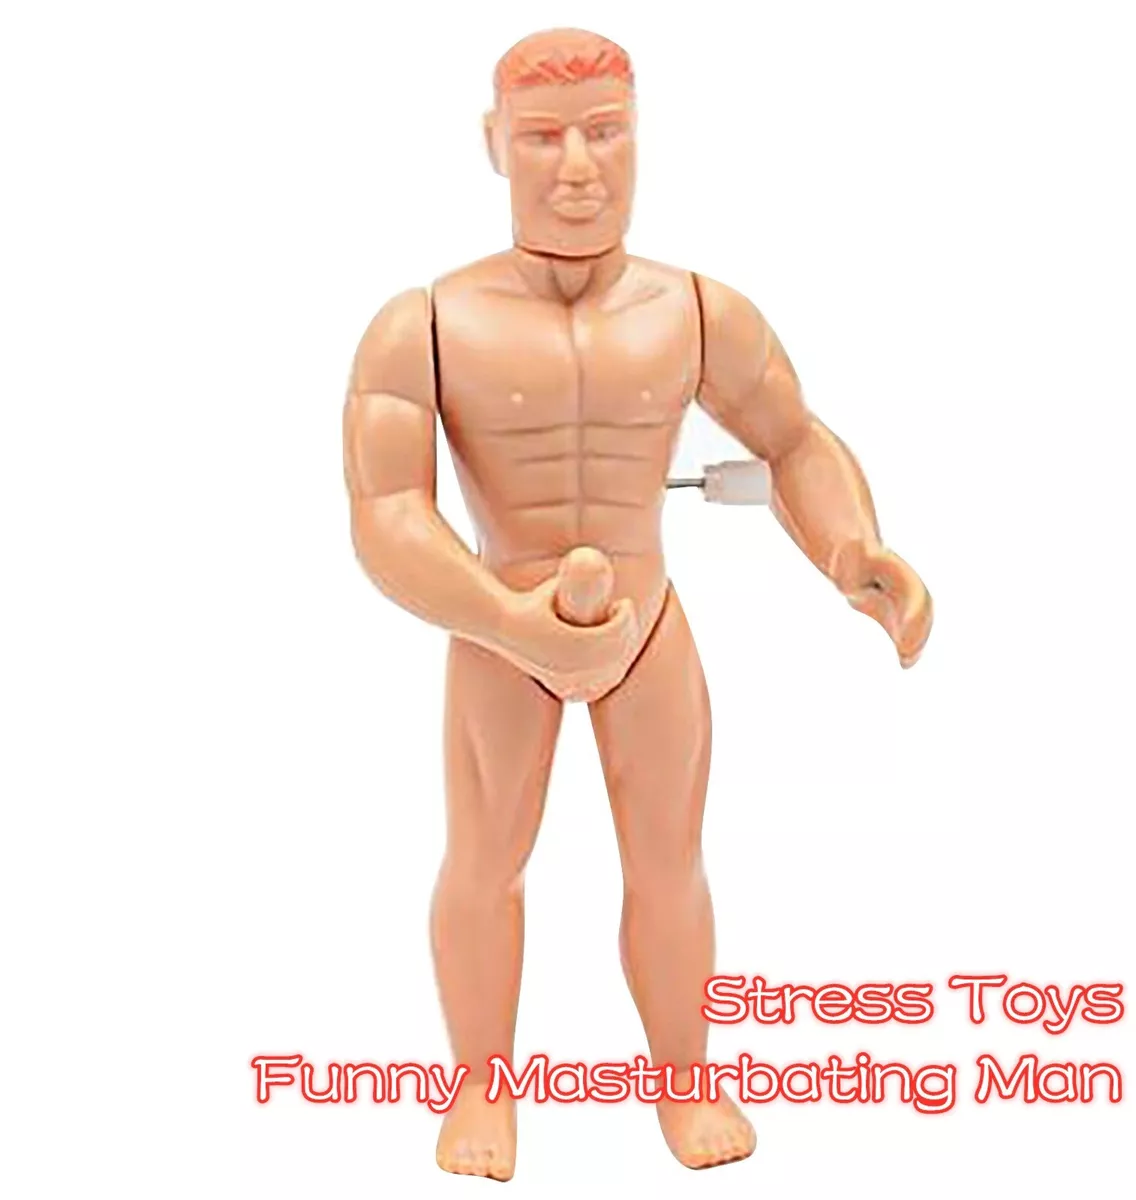 daniel cooper recommends Men Jerking Off With Toys